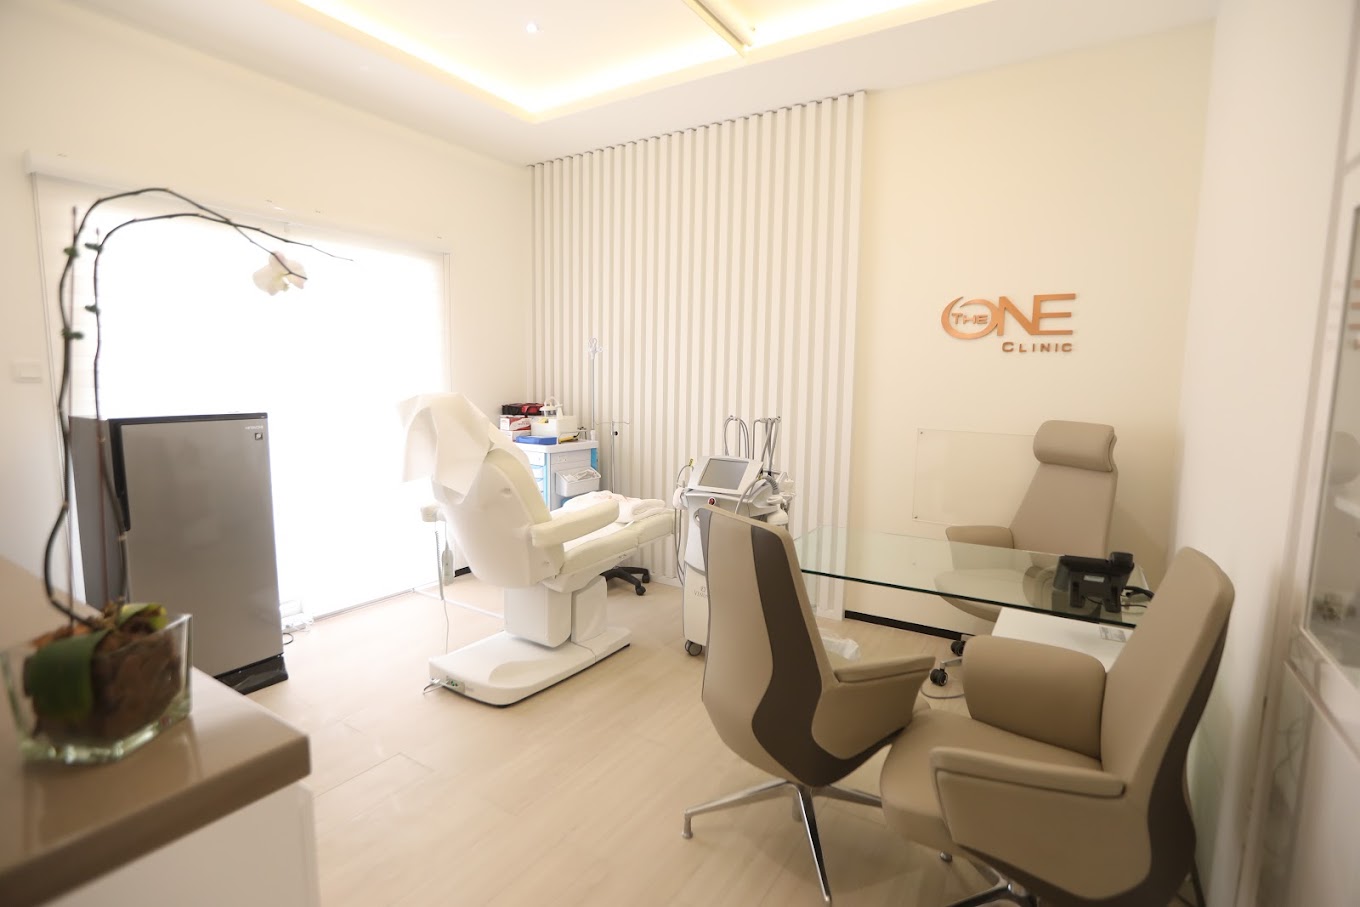 The one clinic